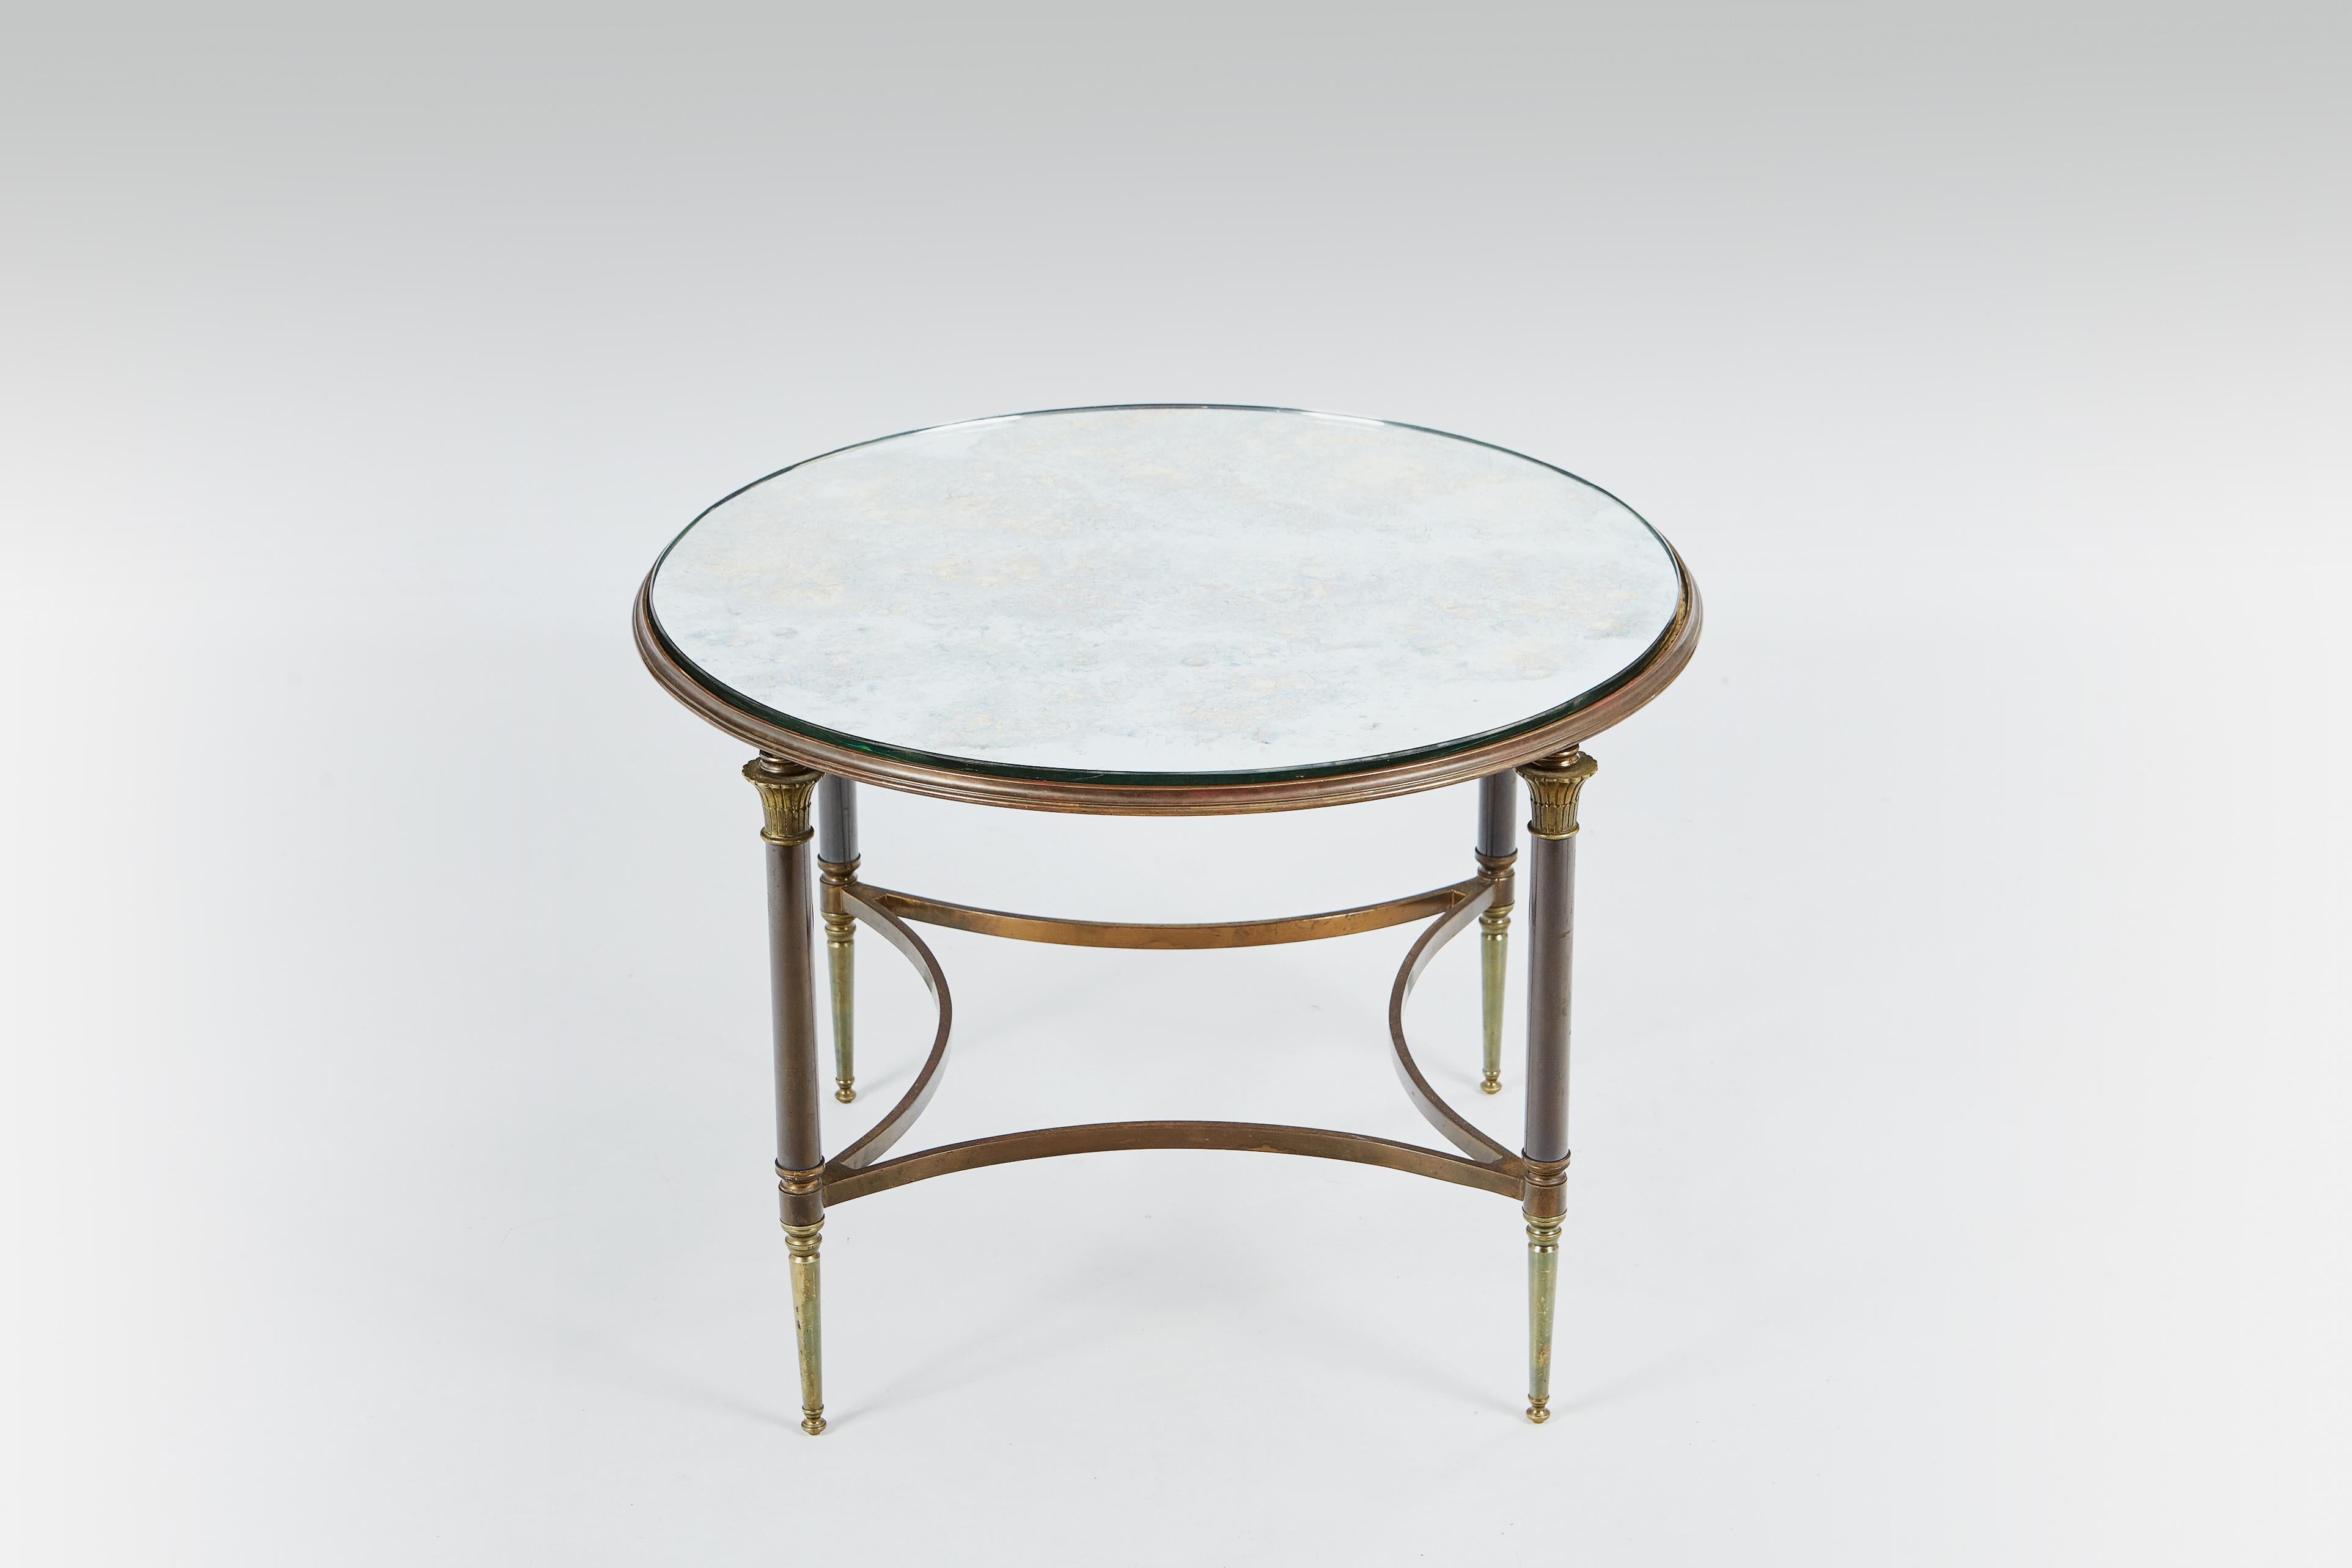 1950s rare & signed (“Jansen, 9 rue Royale”) Maison Jansen circular occasional table, in bronze and brass, with inset églomisé glass top which sits on four Corinthian capital topped legs.

Not all Jansen produced furniture and objects were signed.